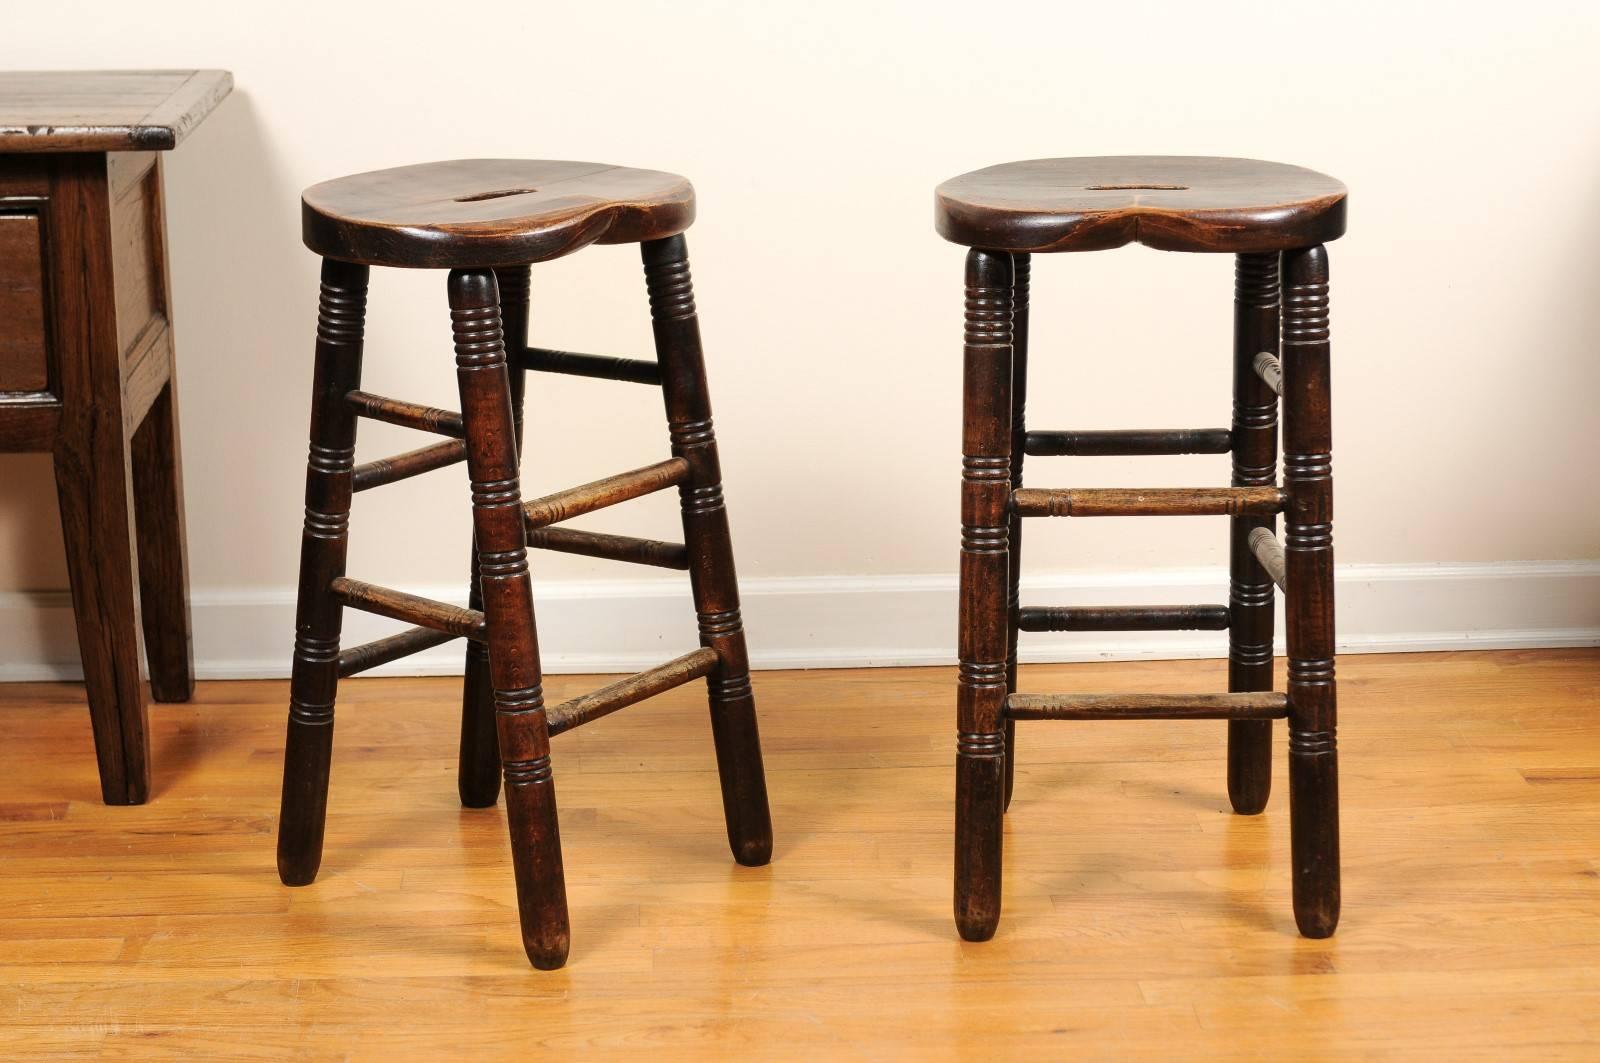 These stools are made to be used at a kitchen bar or another situation that needs a stool 28.5" in height. They were used in schools and also pubs in England. The shape of the seat makes it very comfortable.